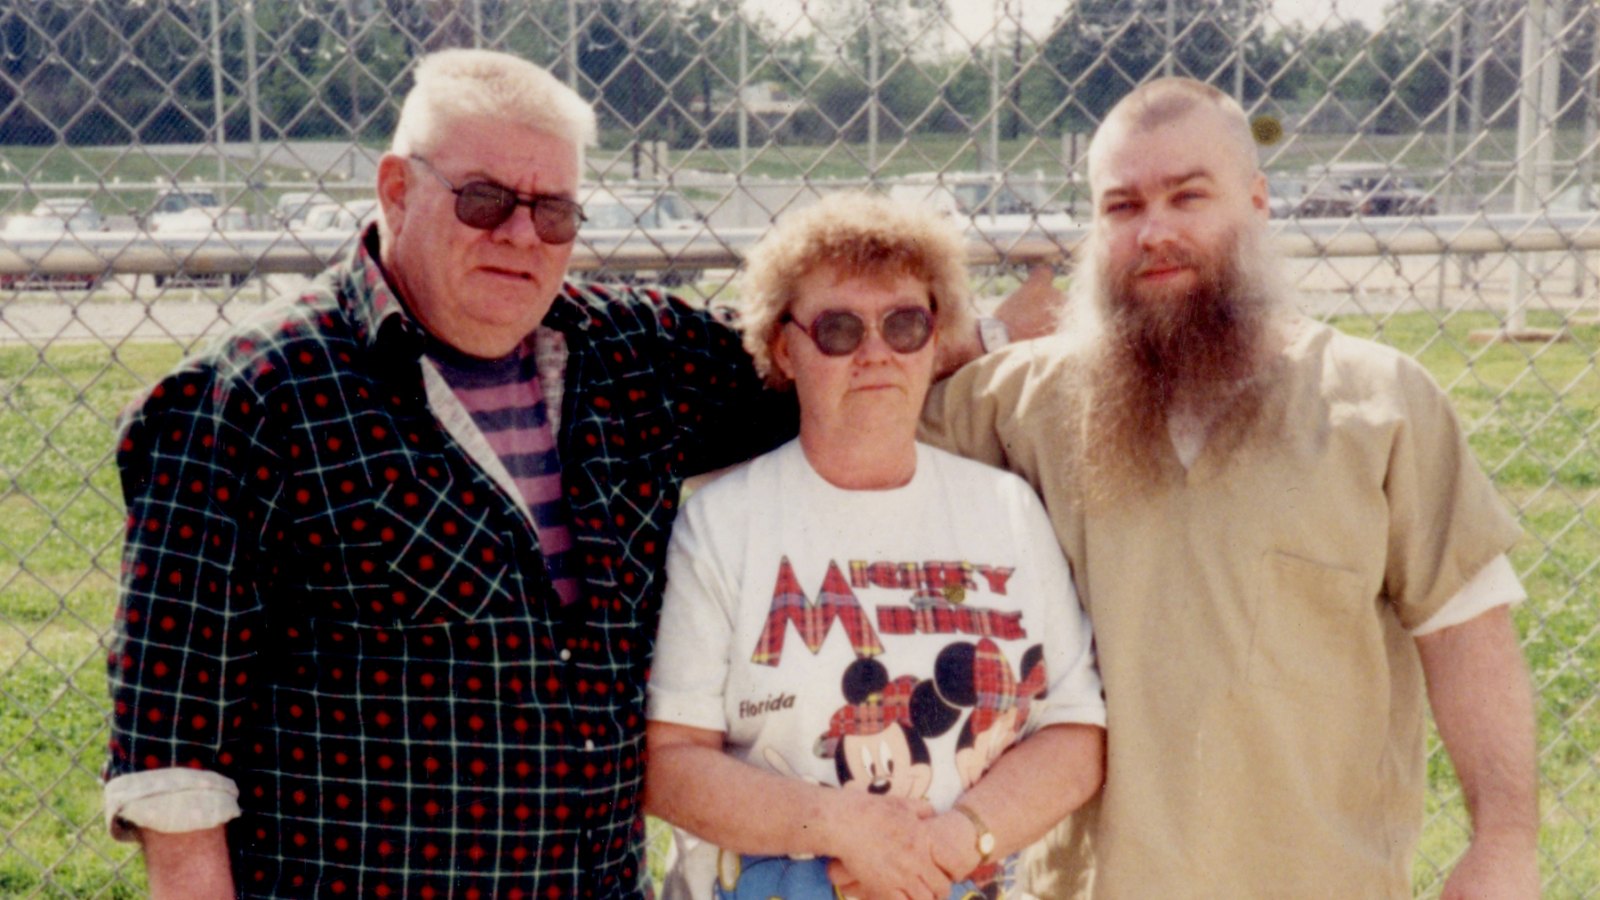 Steven Avery and his parents.